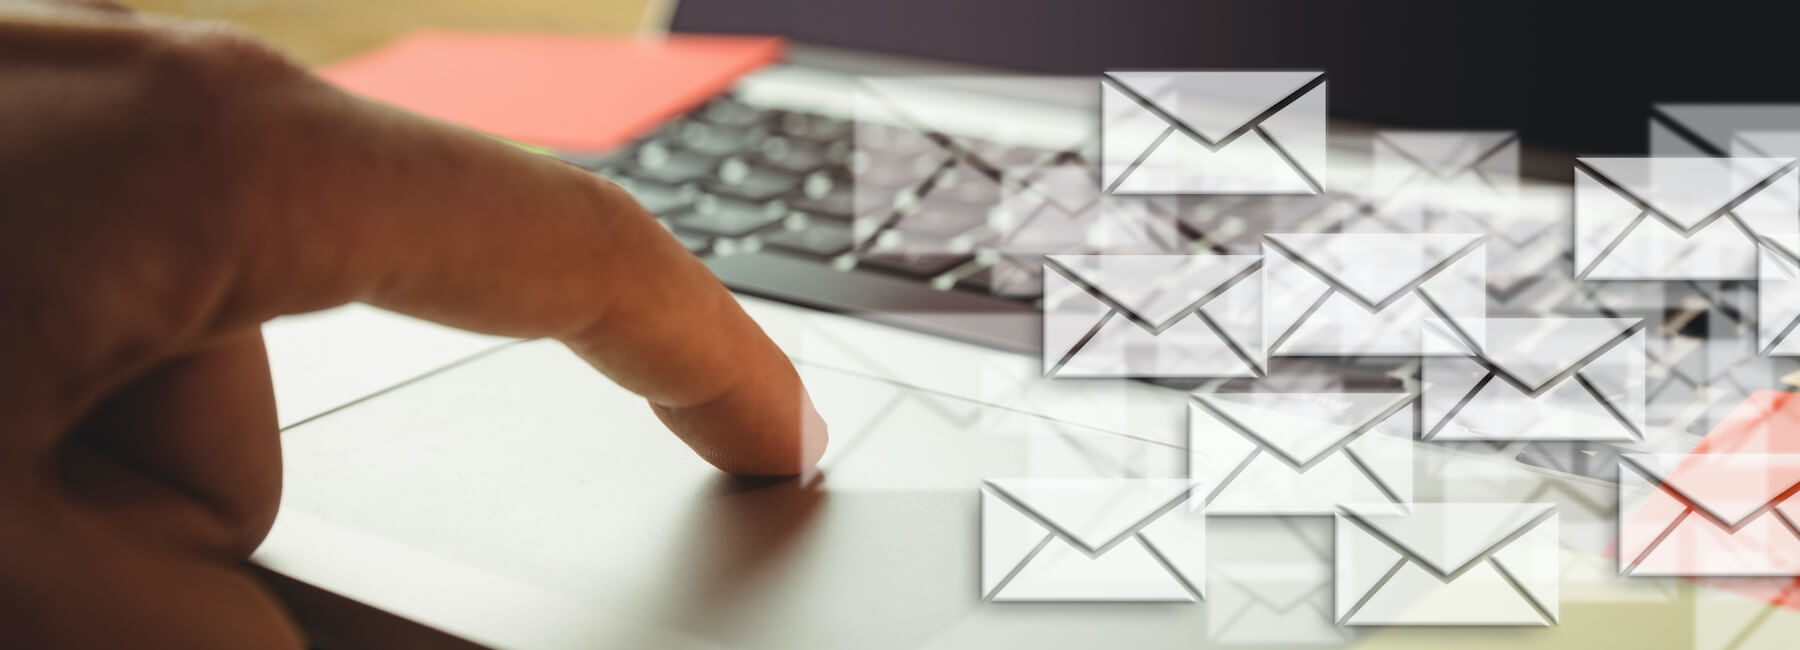 4 Common Methods for Requesting Email Feedback